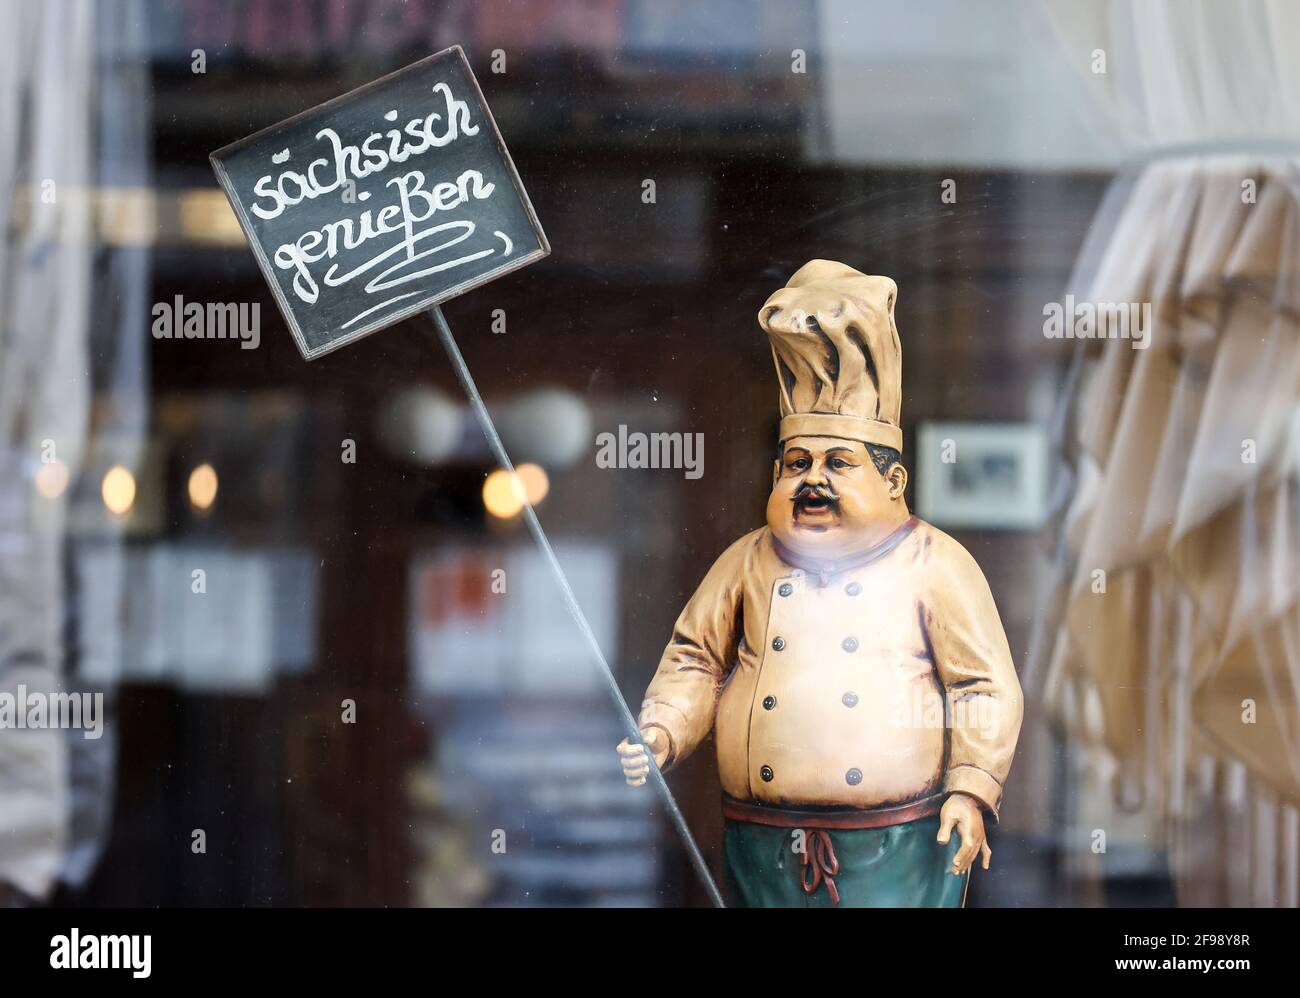 Leipzig, Germany. 15th Apr, 2021. The figure of a cook holds a sign 'sächsisch genießen' (enjoy Saxony) in the window of a restaurant closed due to corona. Credit: Jan Woitas/dpa-Zentralbild/ZB/dpa/Alamy Live News Stock Photo